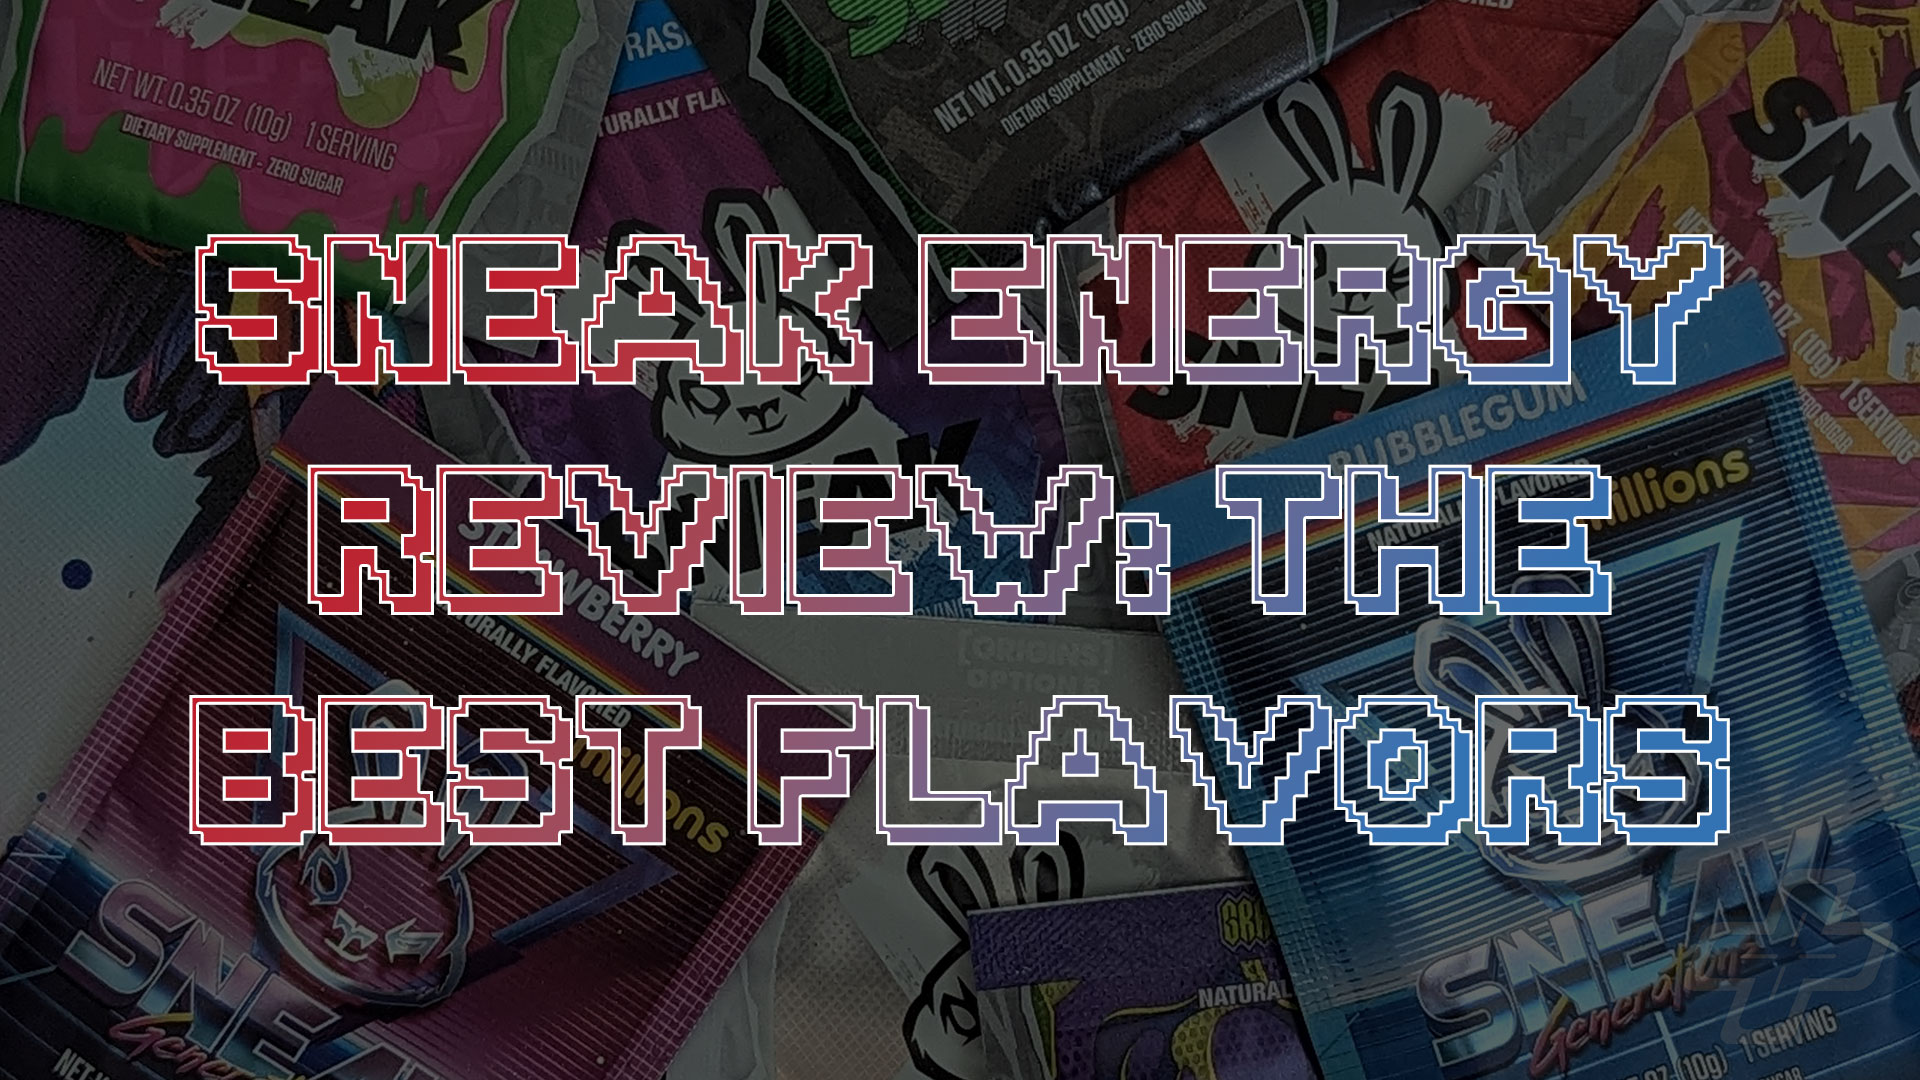 Sneak Energy Review: The Best Flavors